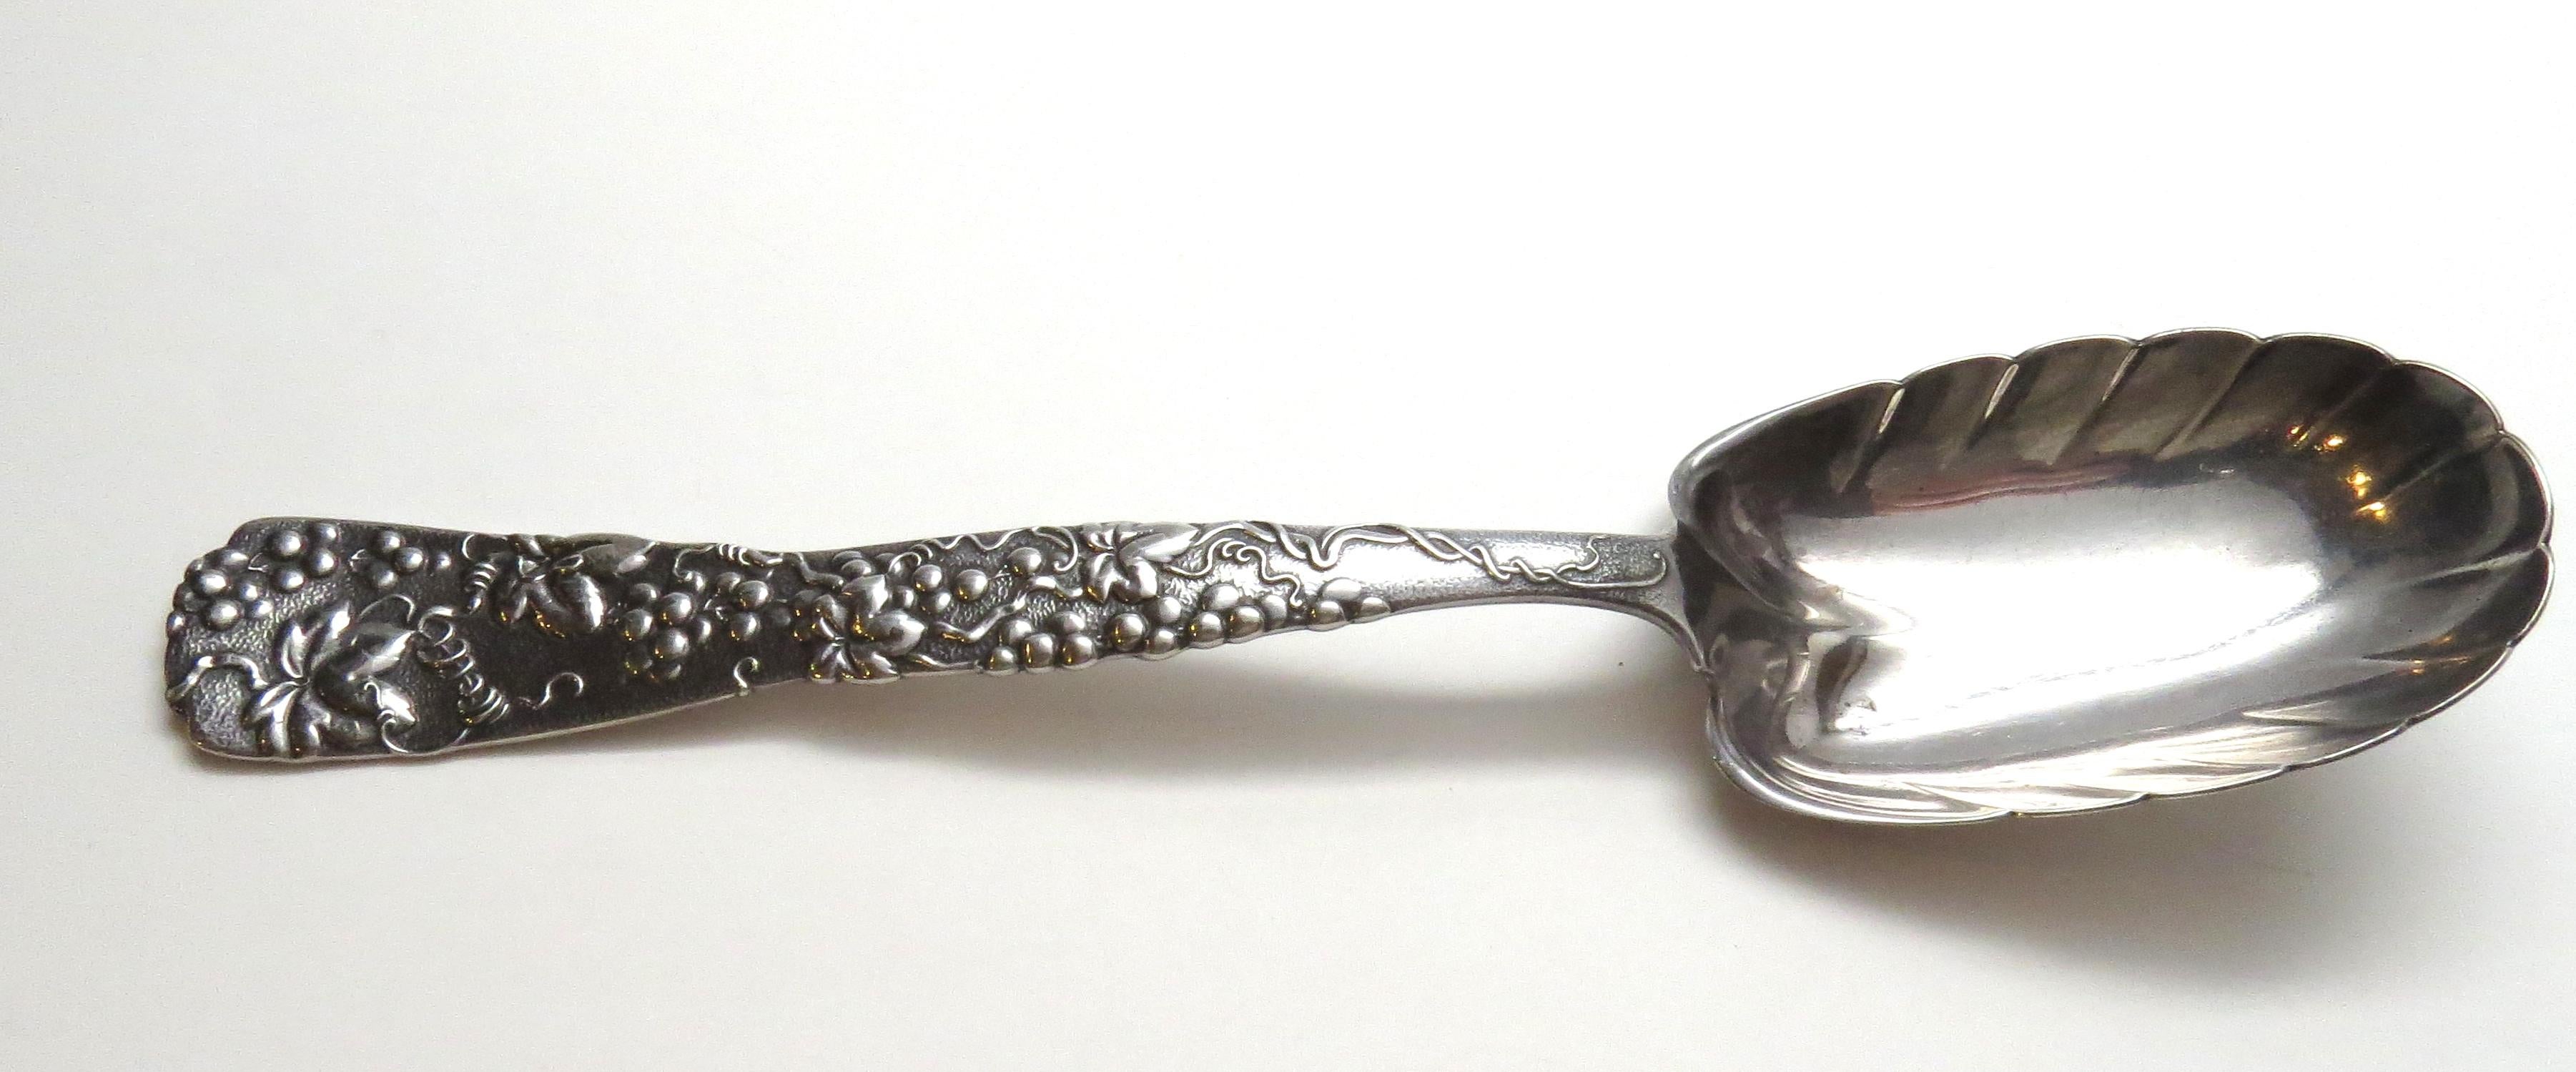 Antique Tiffany & Co. vine sterling silver Berry 1872 Preserve spoon. Presented is a nice antique Tiffany and Company sterling silver serving spoon. This spoon is done in the Vine pattern. The bowl of the spoon has a scallop edge. This is a good